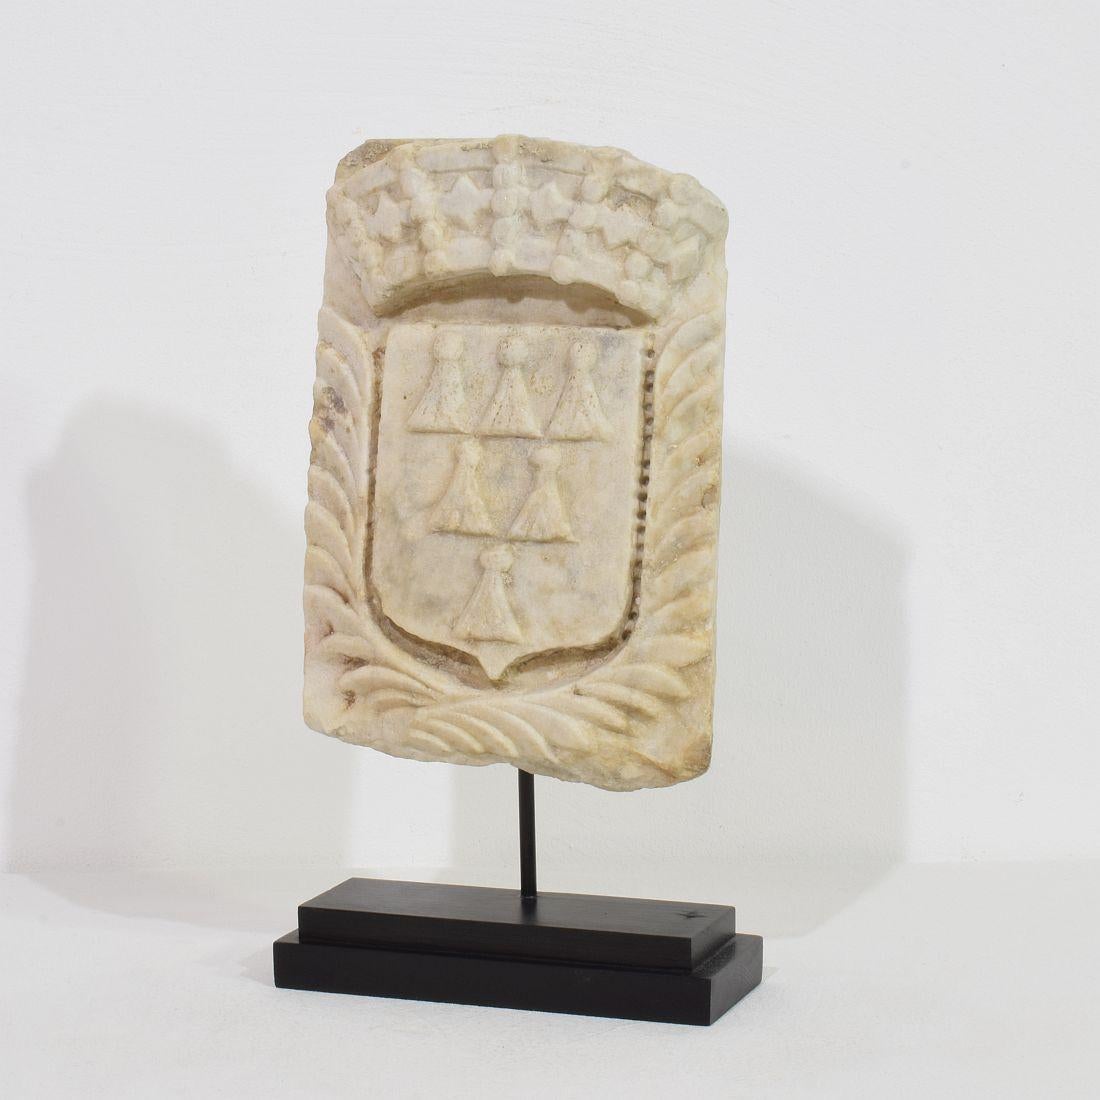 Very beautiful marble coat of arms. Great weathered patina
Italy, circa 1650-1750. Weathered.
Measurement here below is inclusive the wooden base.